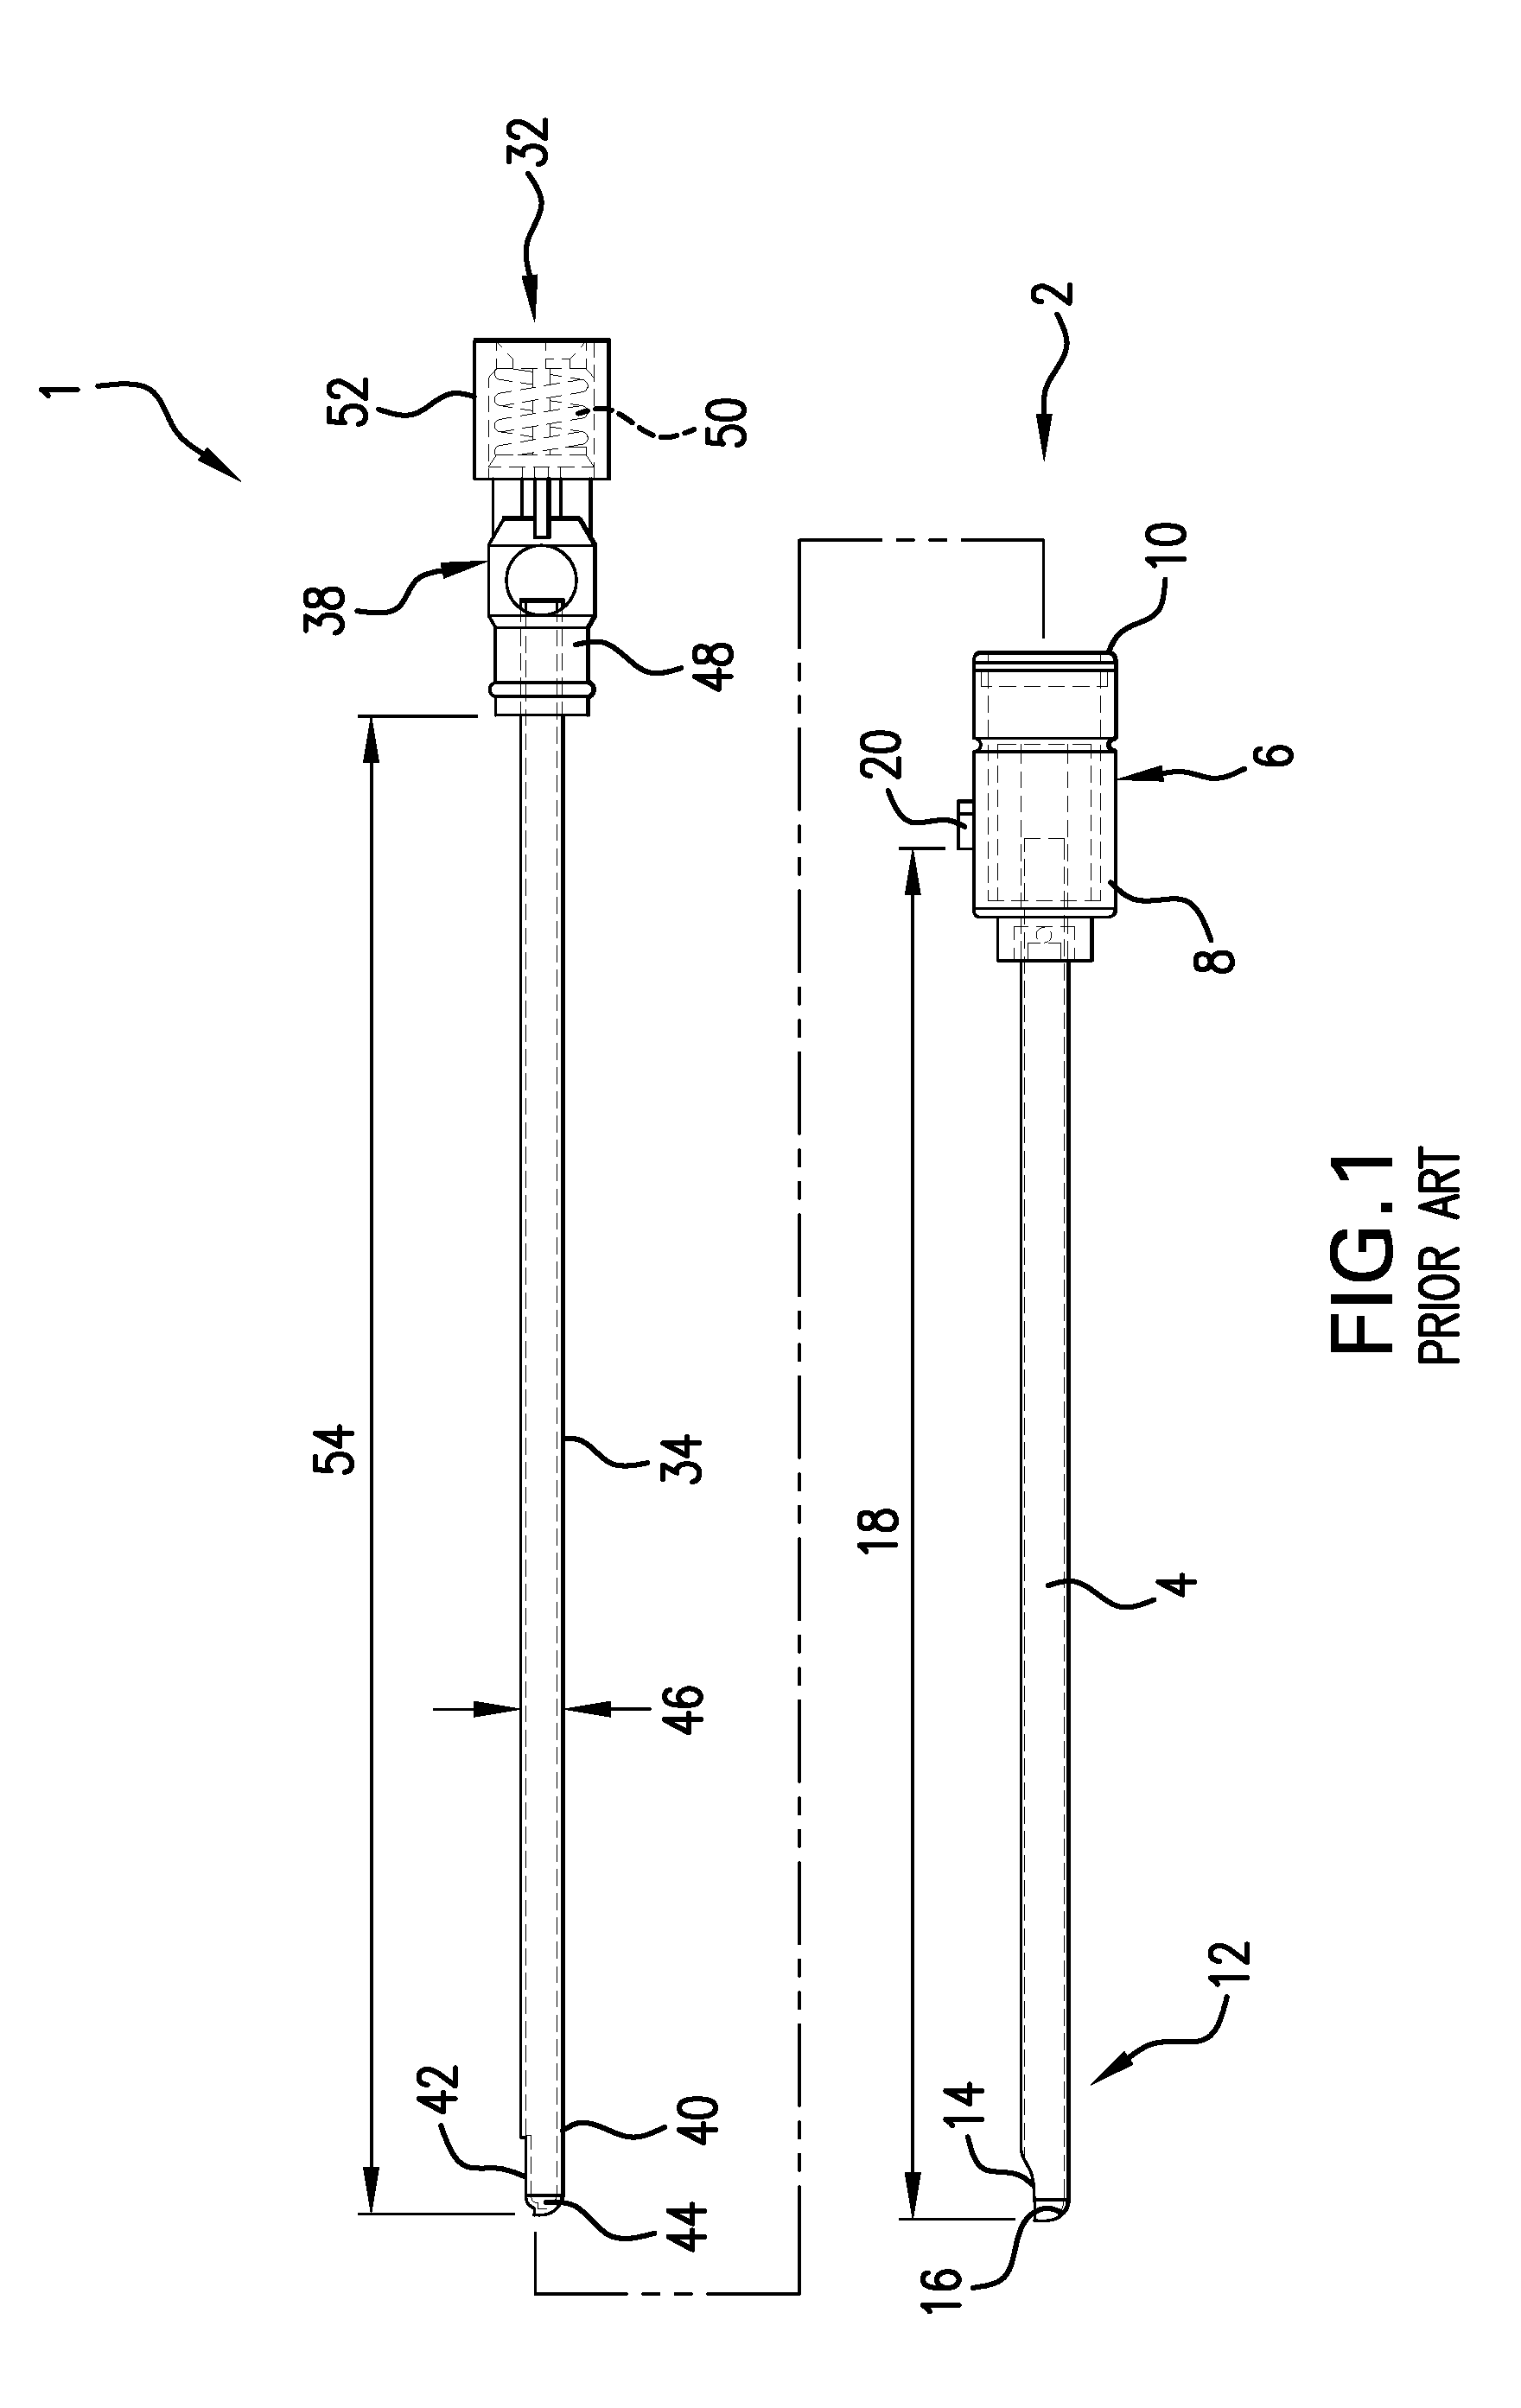 Endoscopic cutting instruments having improved cutting efficiency and reduced manufacturing costs